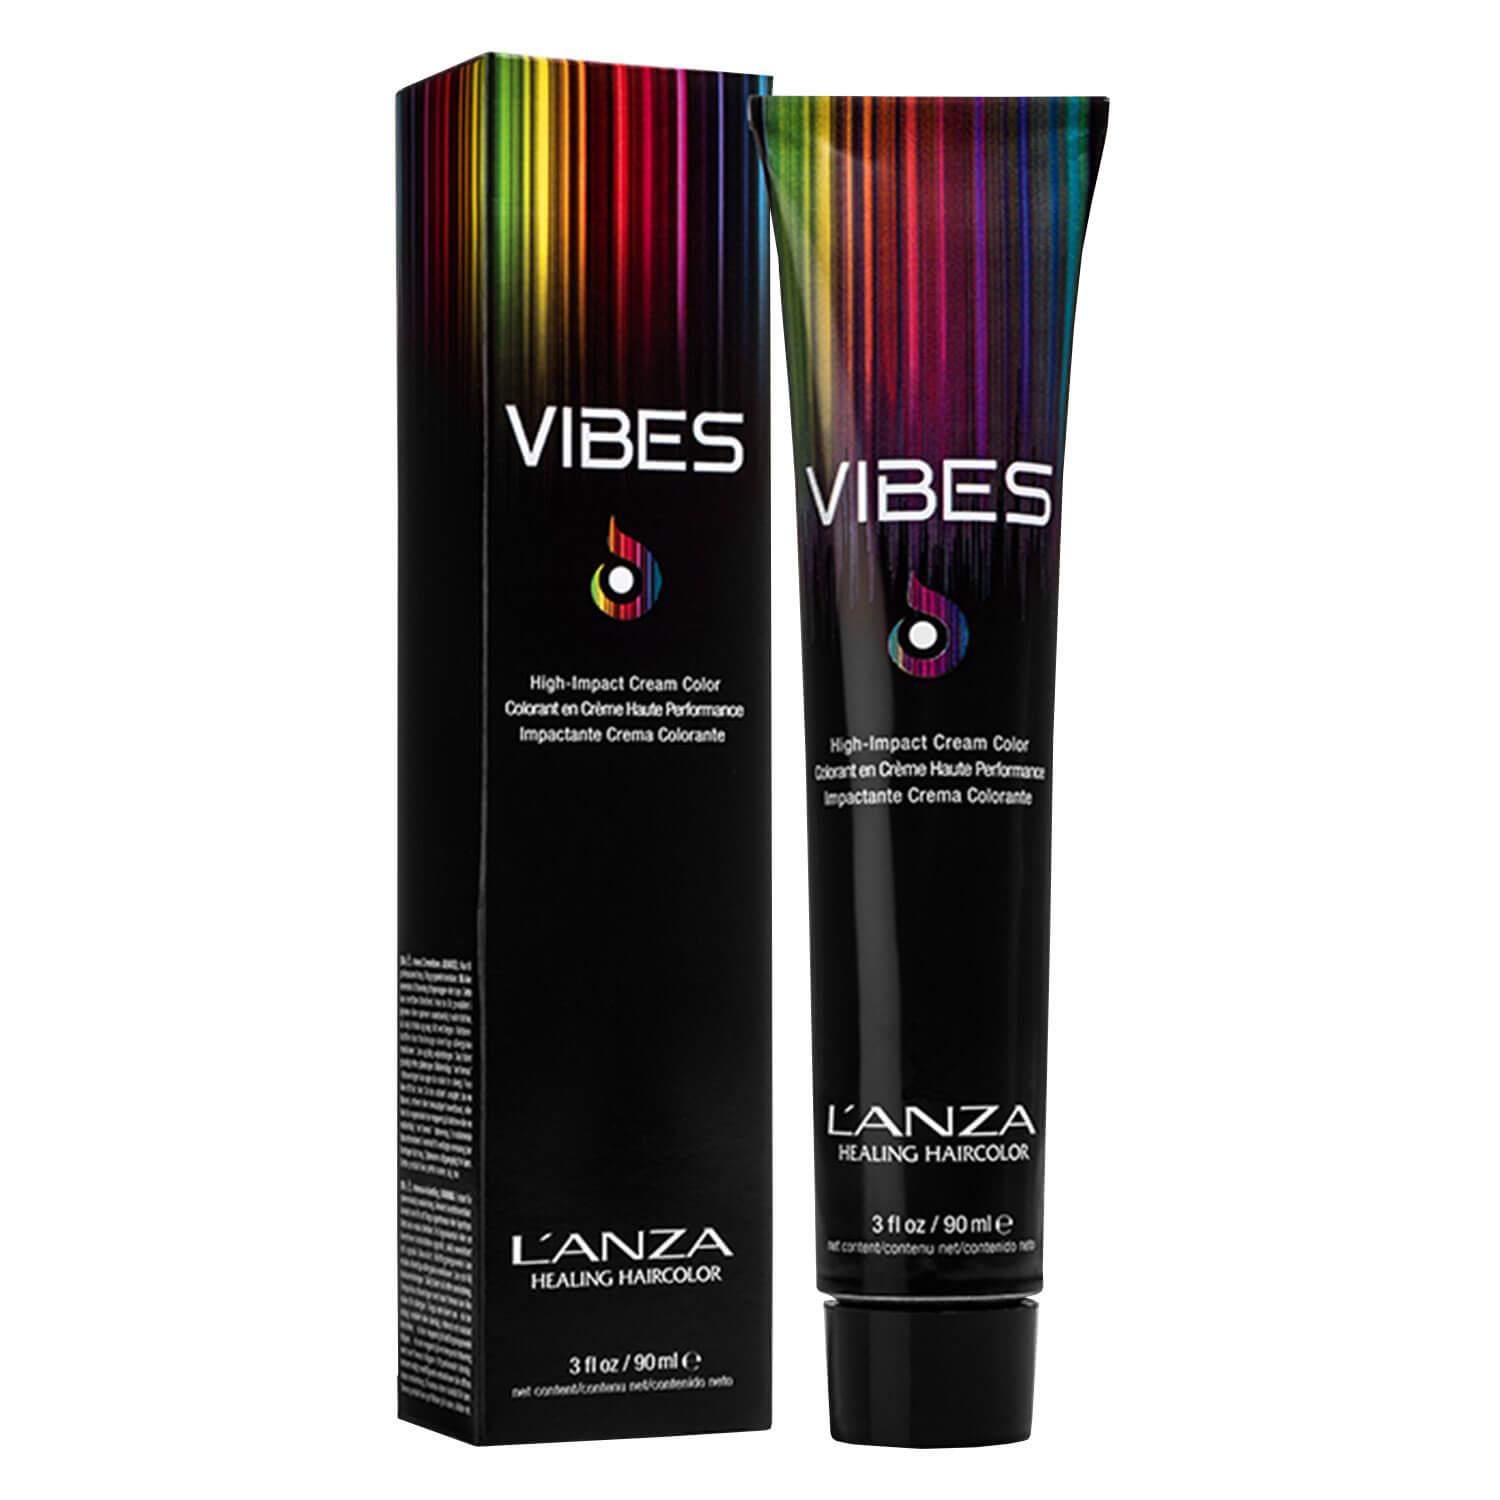 VIBES - High-Impact Cream Color Bare